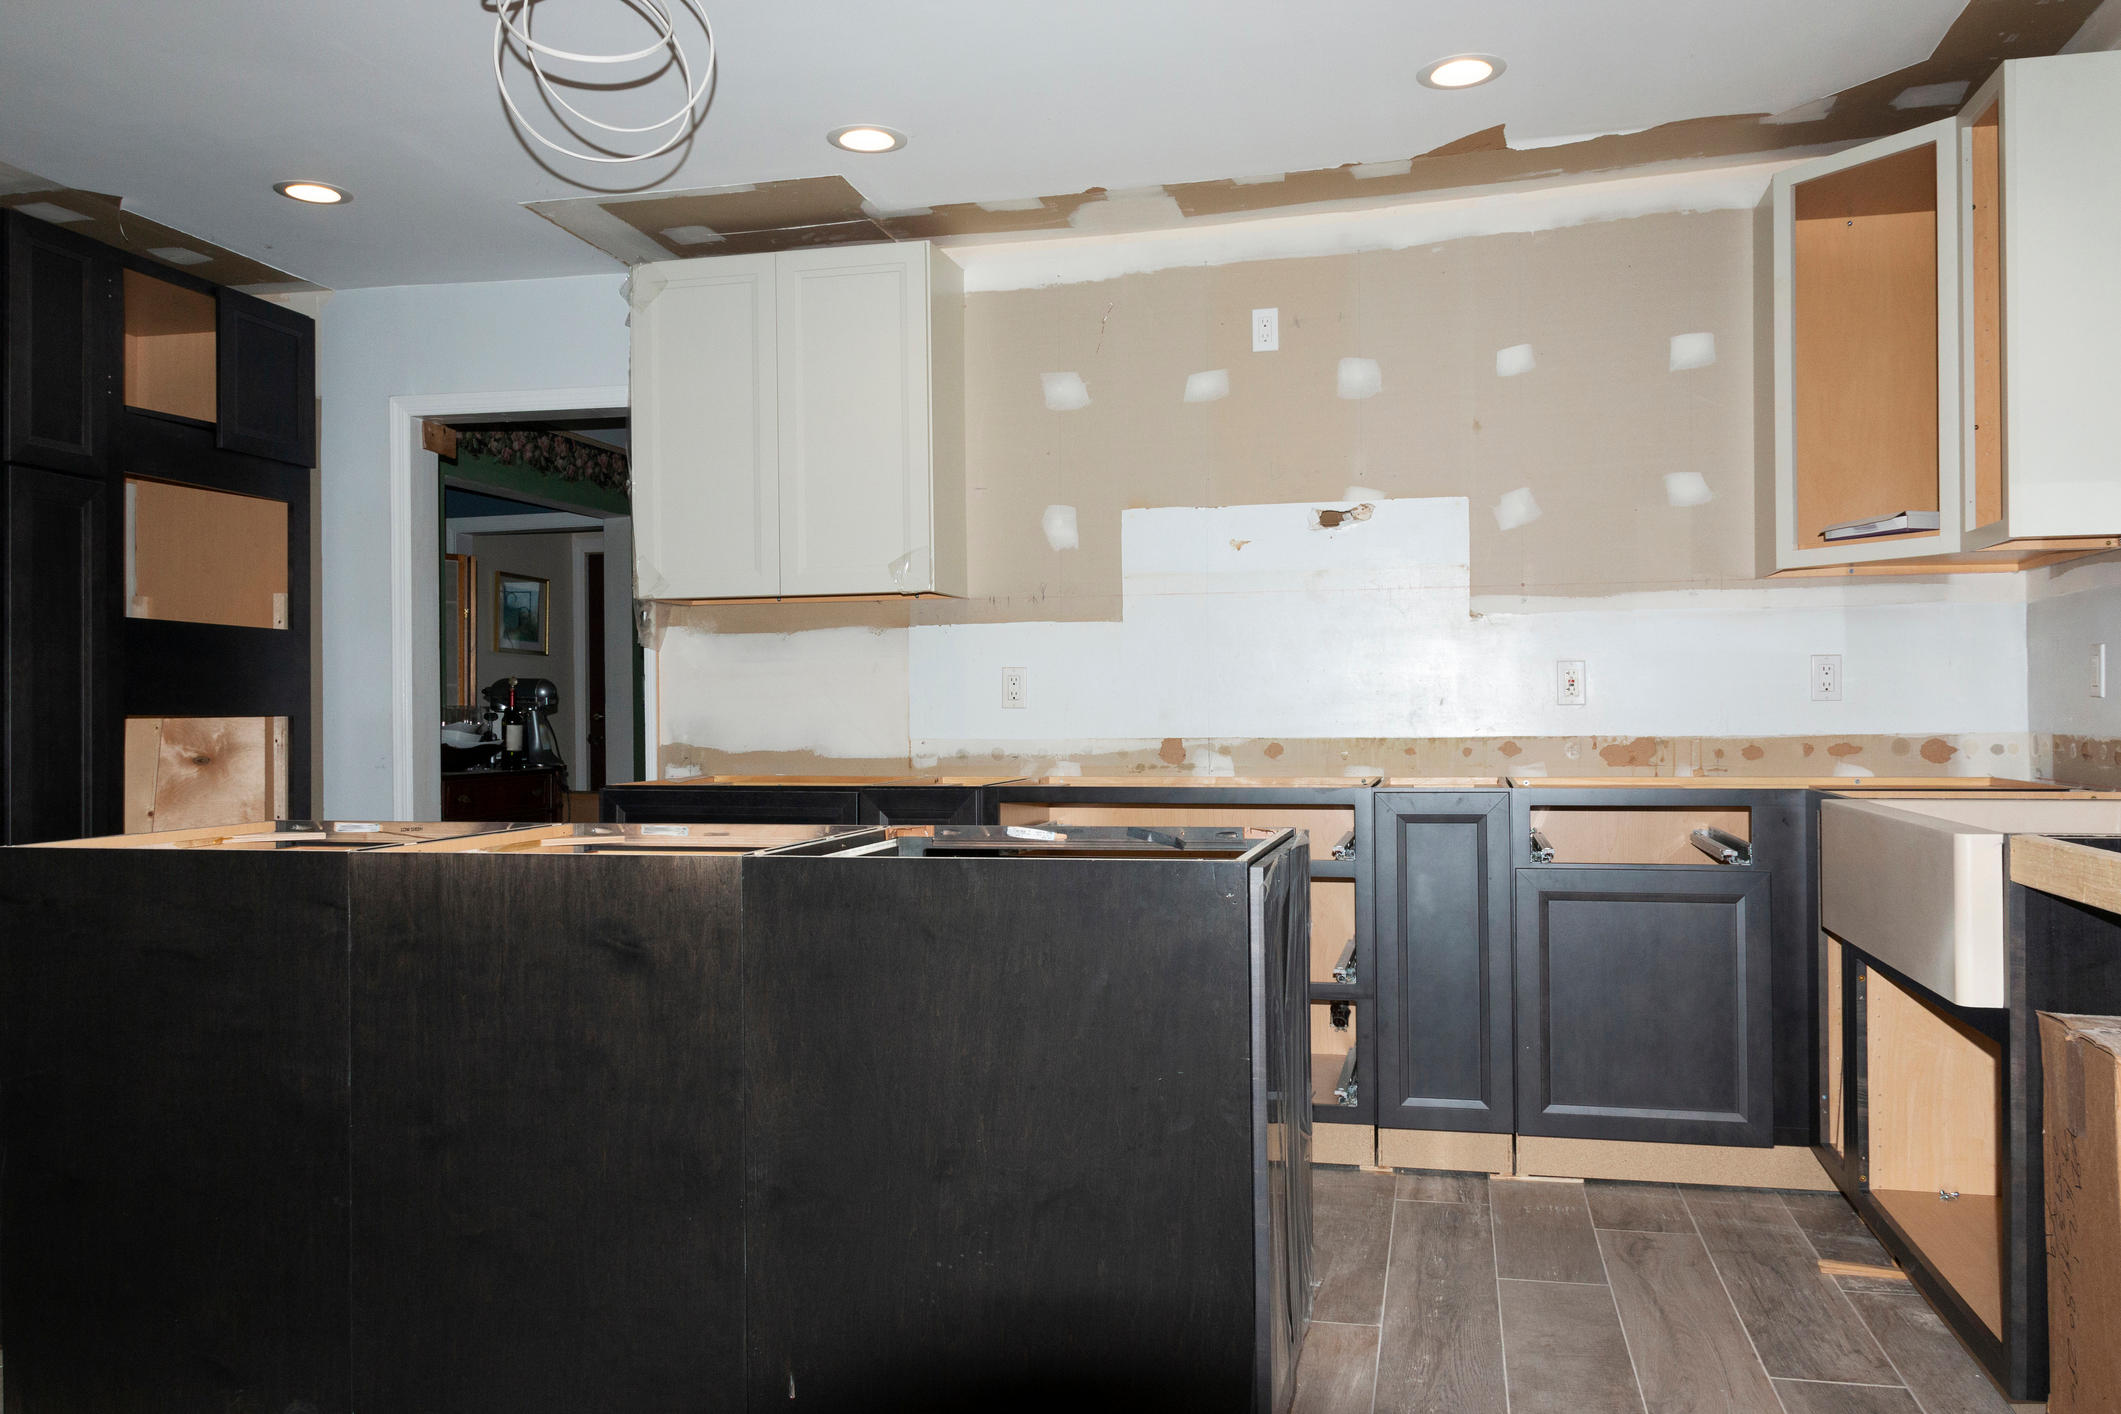 Here at Top Tier Restoration & Remodeling, we are experts in kitchen remodeling services. We provide our clients with a comprehensive range of services to transform their Nassau County kitchens. We can build you a kitchen that meets all of your wants and needs – and even your dreams!